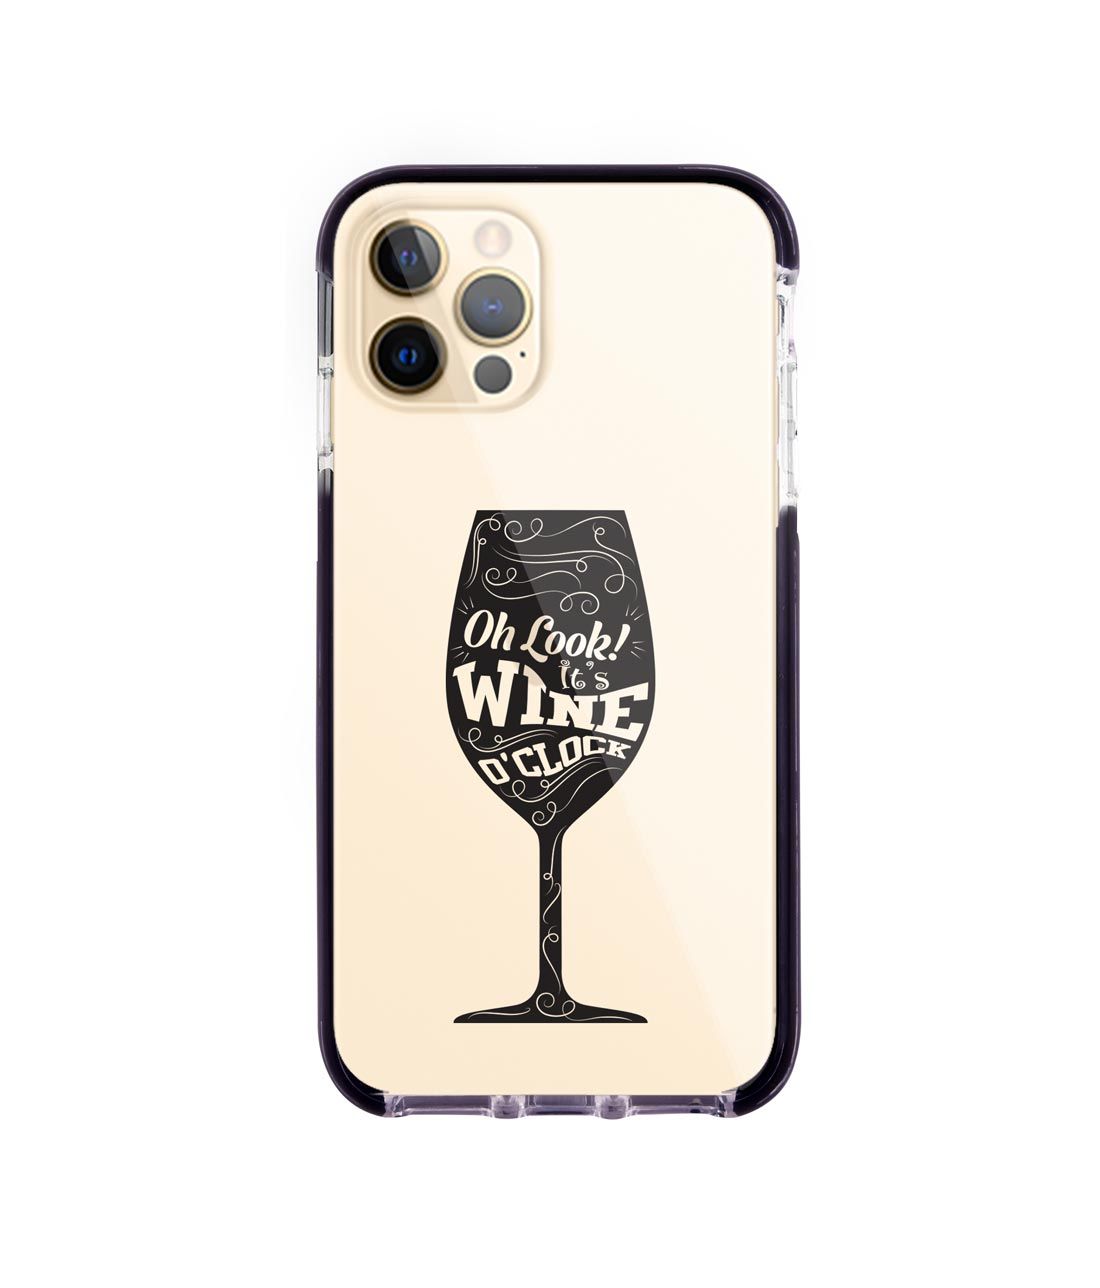 Wine o clock - Extreme Case for iPhone 12 Pro Max